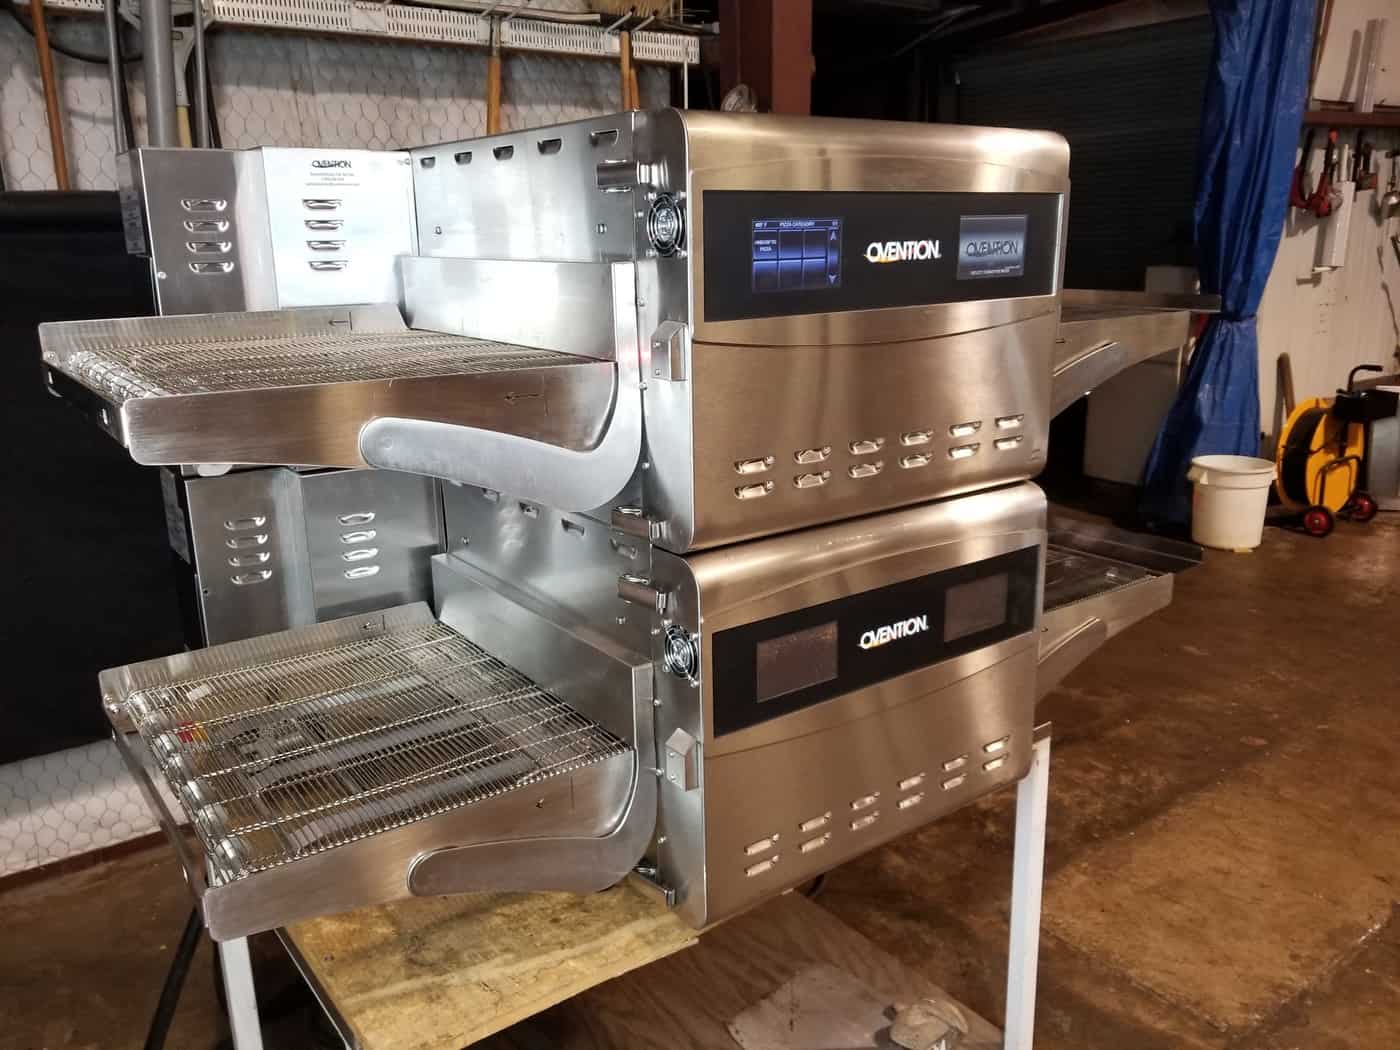 Ovention S2000 Dbl. Electric Shuttle/Conveyor Pizza Ovens